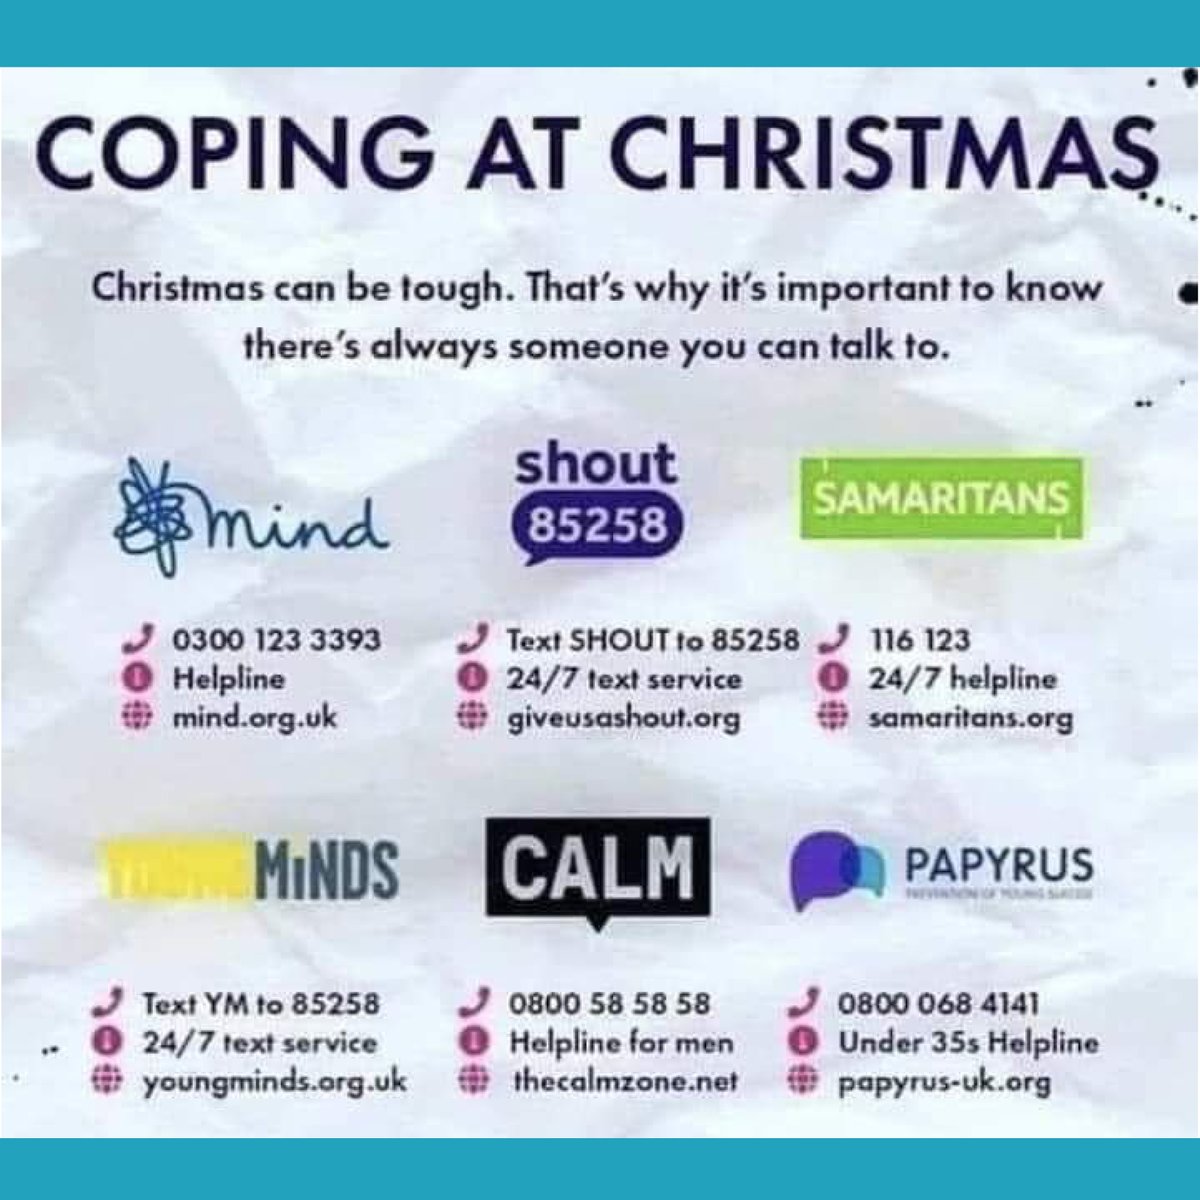 Festive period can be a hard time for many. This is a reminder we are here for you and some additional information you may find useful. #unpaidcarers #worcestershirehour #wellnesswednesday #wednesdayfeels #carerwellbeing #carersupport